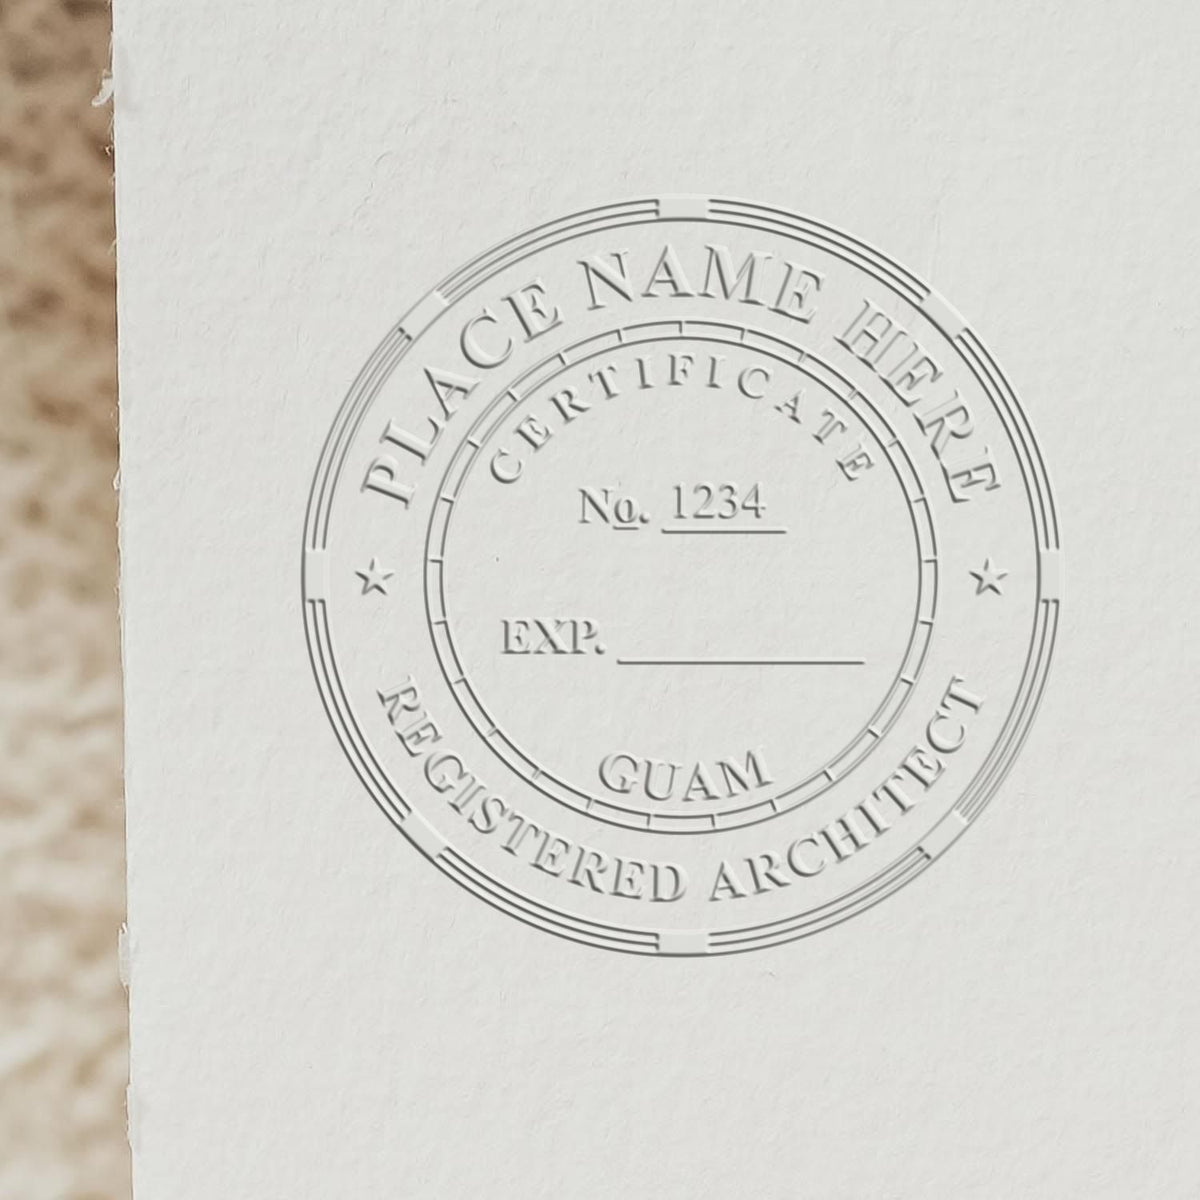 Extended Long Reach Guam Architect Seal Embosser in use photo showing a stamped imprint of the Extended Long Reach Guam Architect Seal Embosser